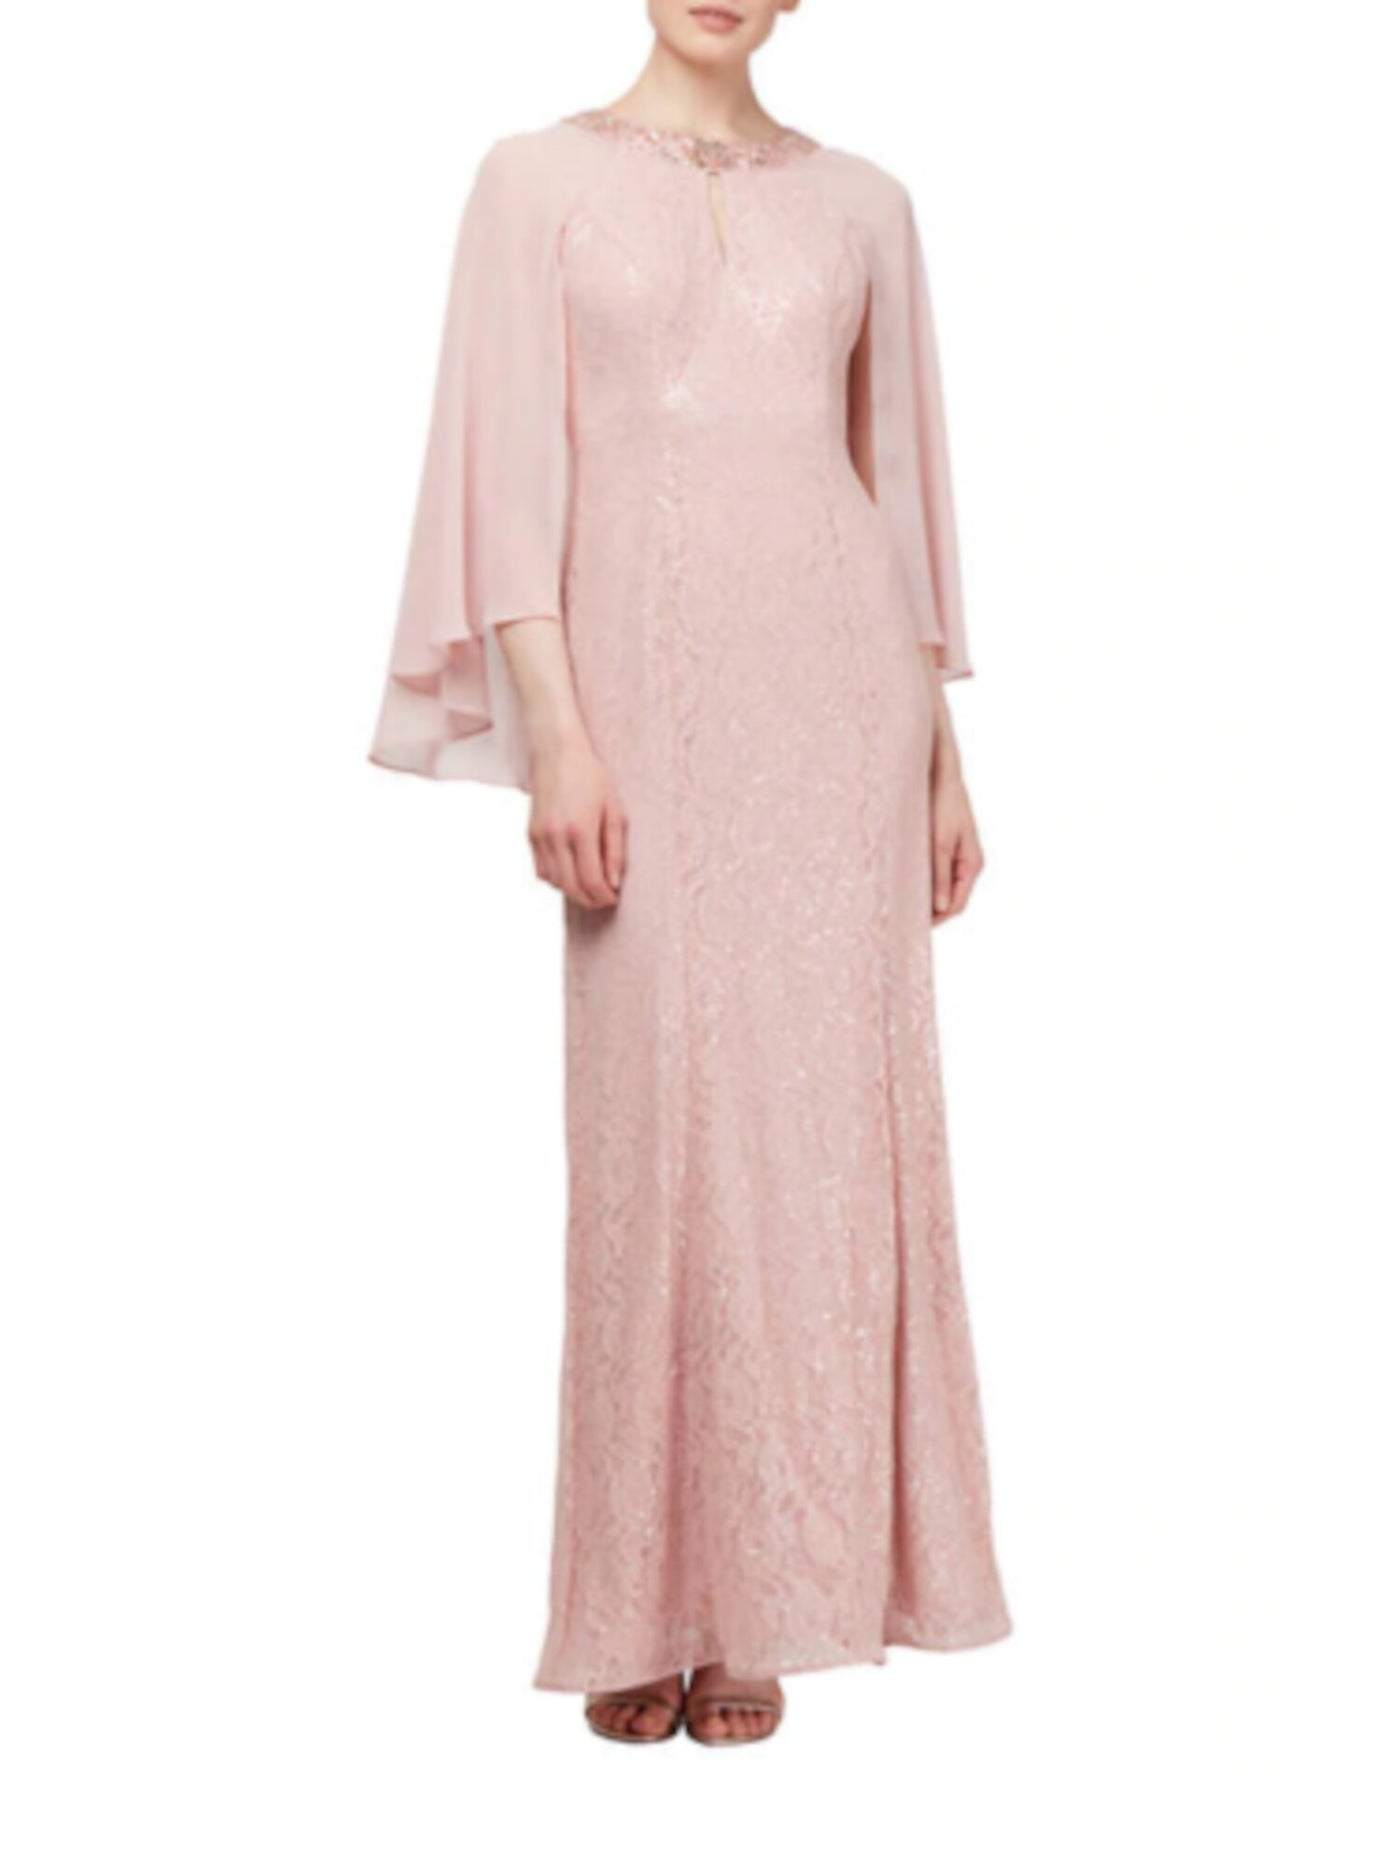 SLNY Womens Pink Sequined Rhinestone Lace Cape Gown 3/4 Sleeve Keyhole Maxi Formal Fit + Flare Dress 14